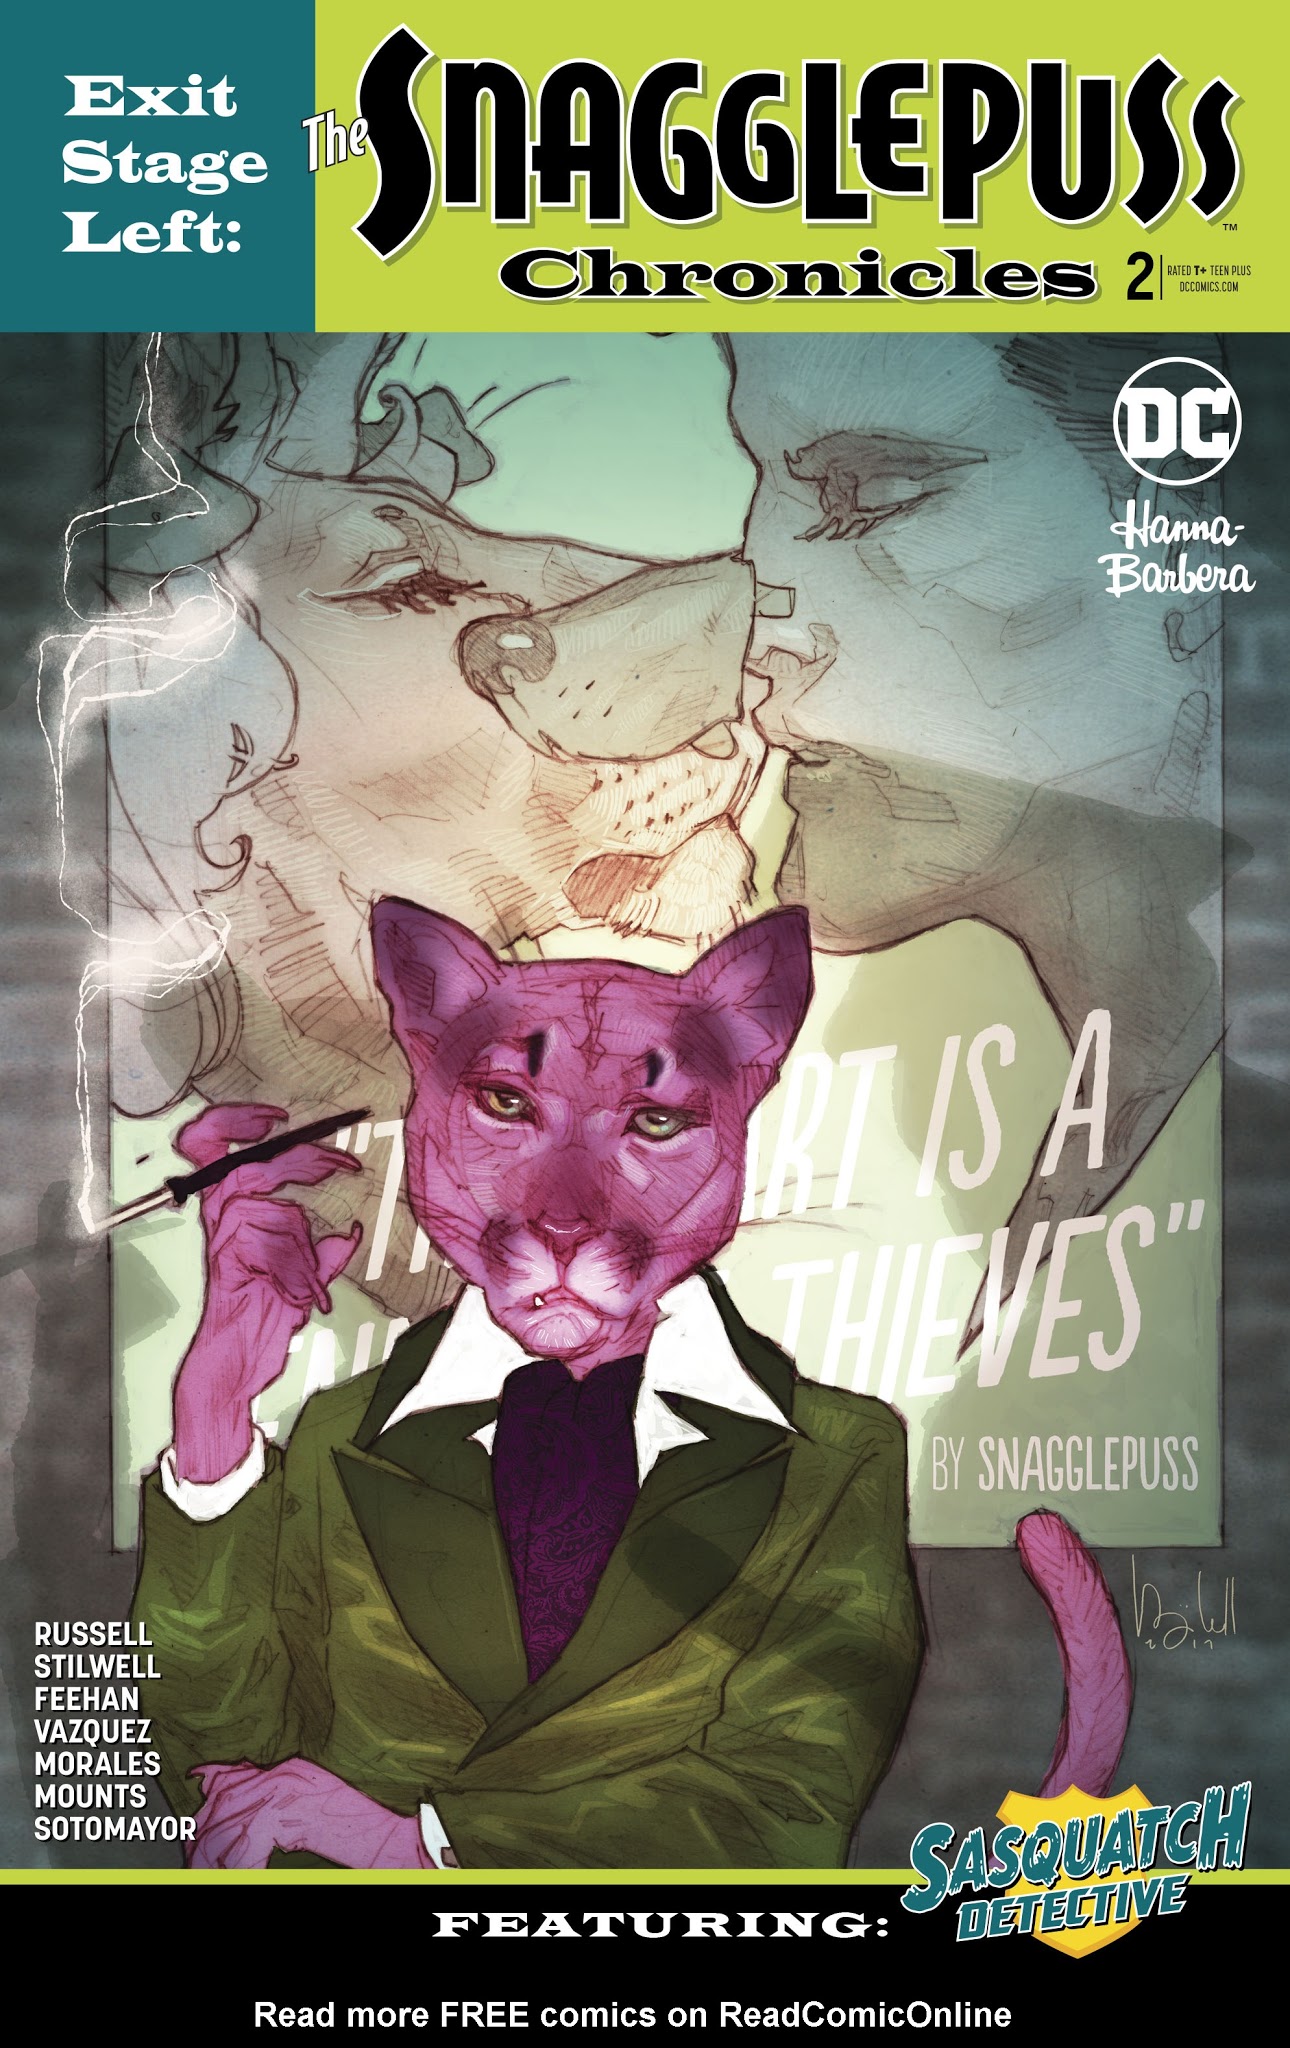 Read online Exit Stage Left: The Snagglepuss Chronicles comic -  Issue #2 - 1